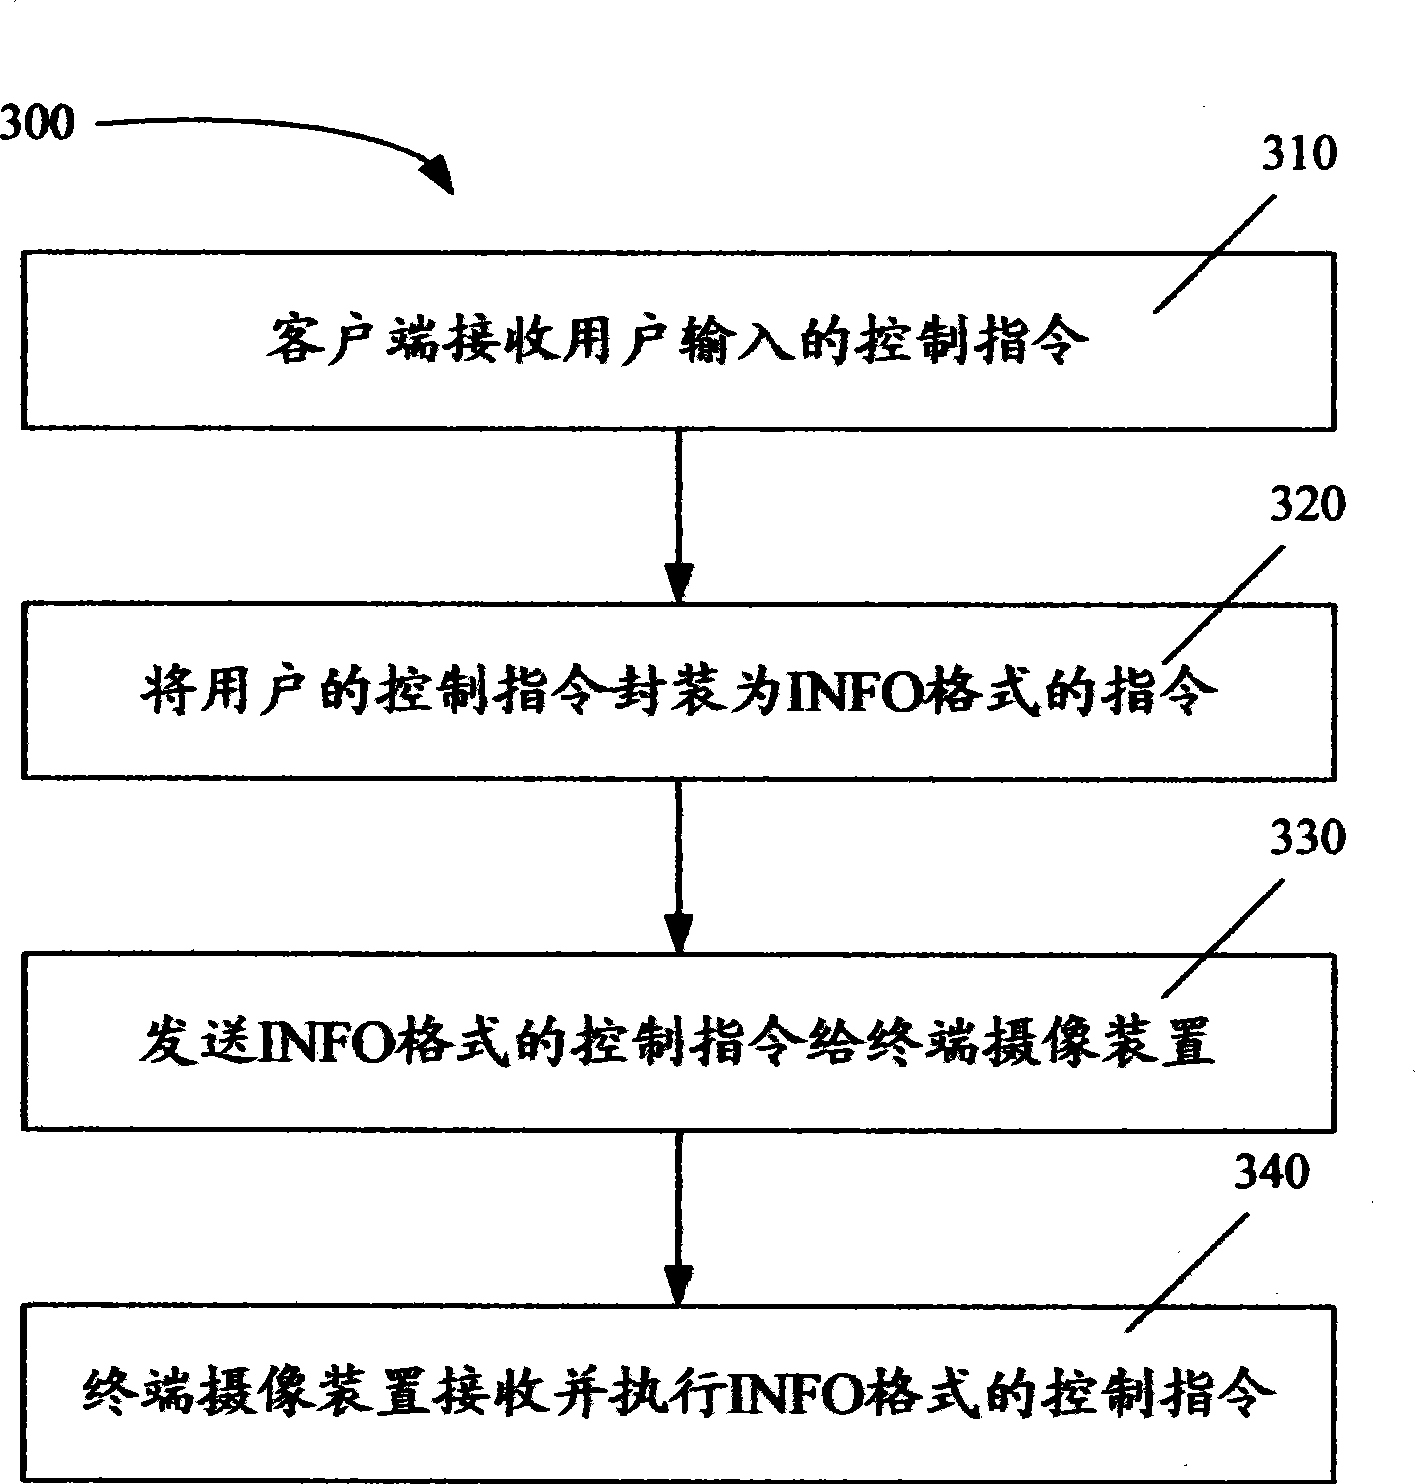 Method for transmitting information to terminal camera device by customer terminal in network video monitoring system